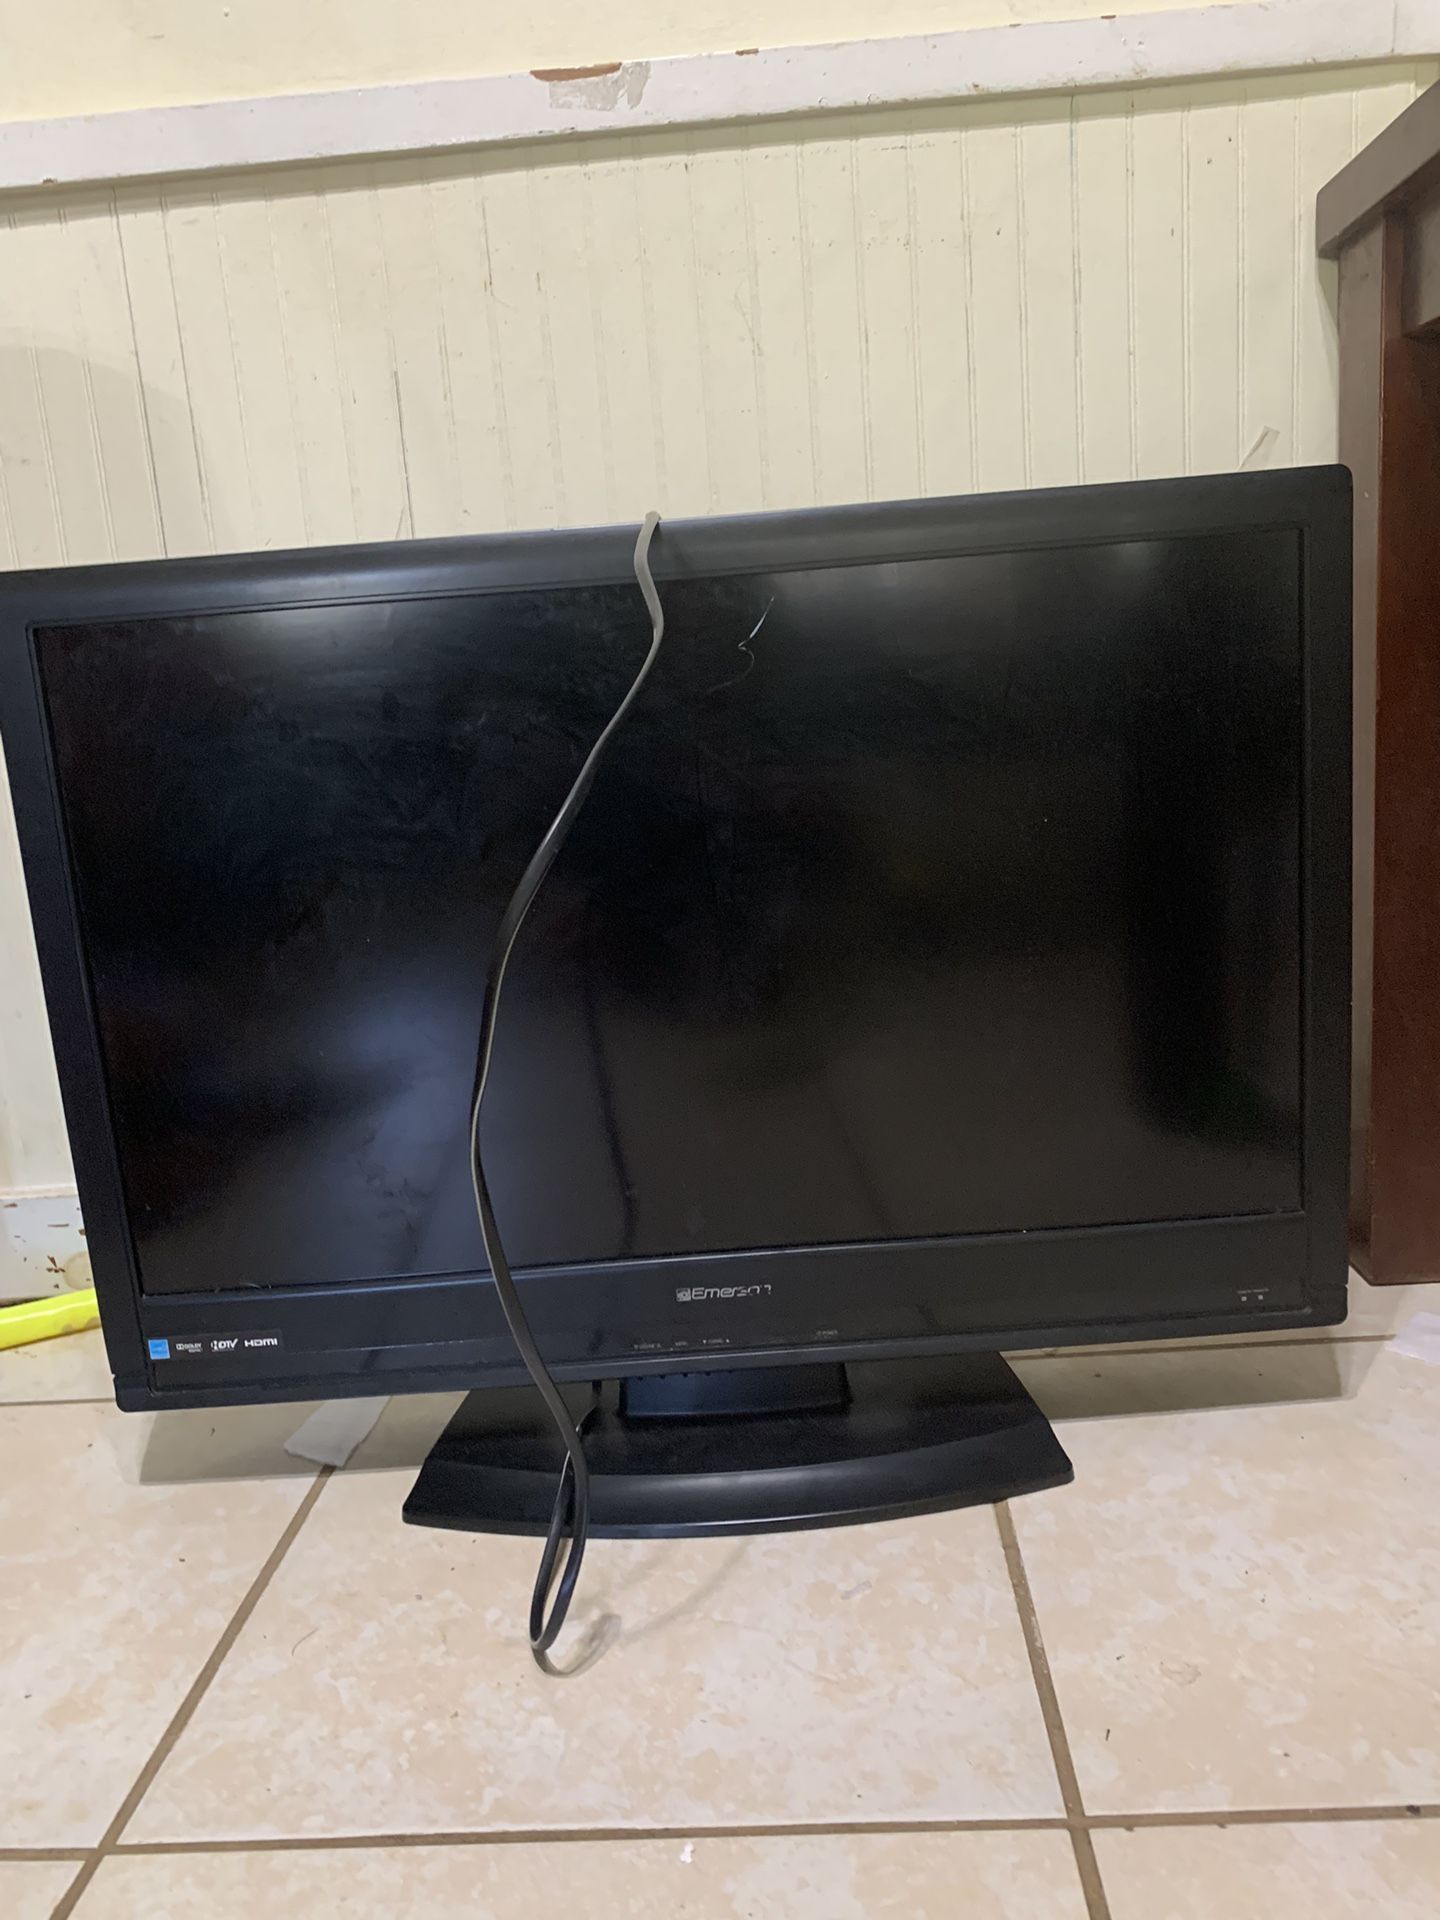 Emerson 32" 720p LCD HDTV with Digital Tuner